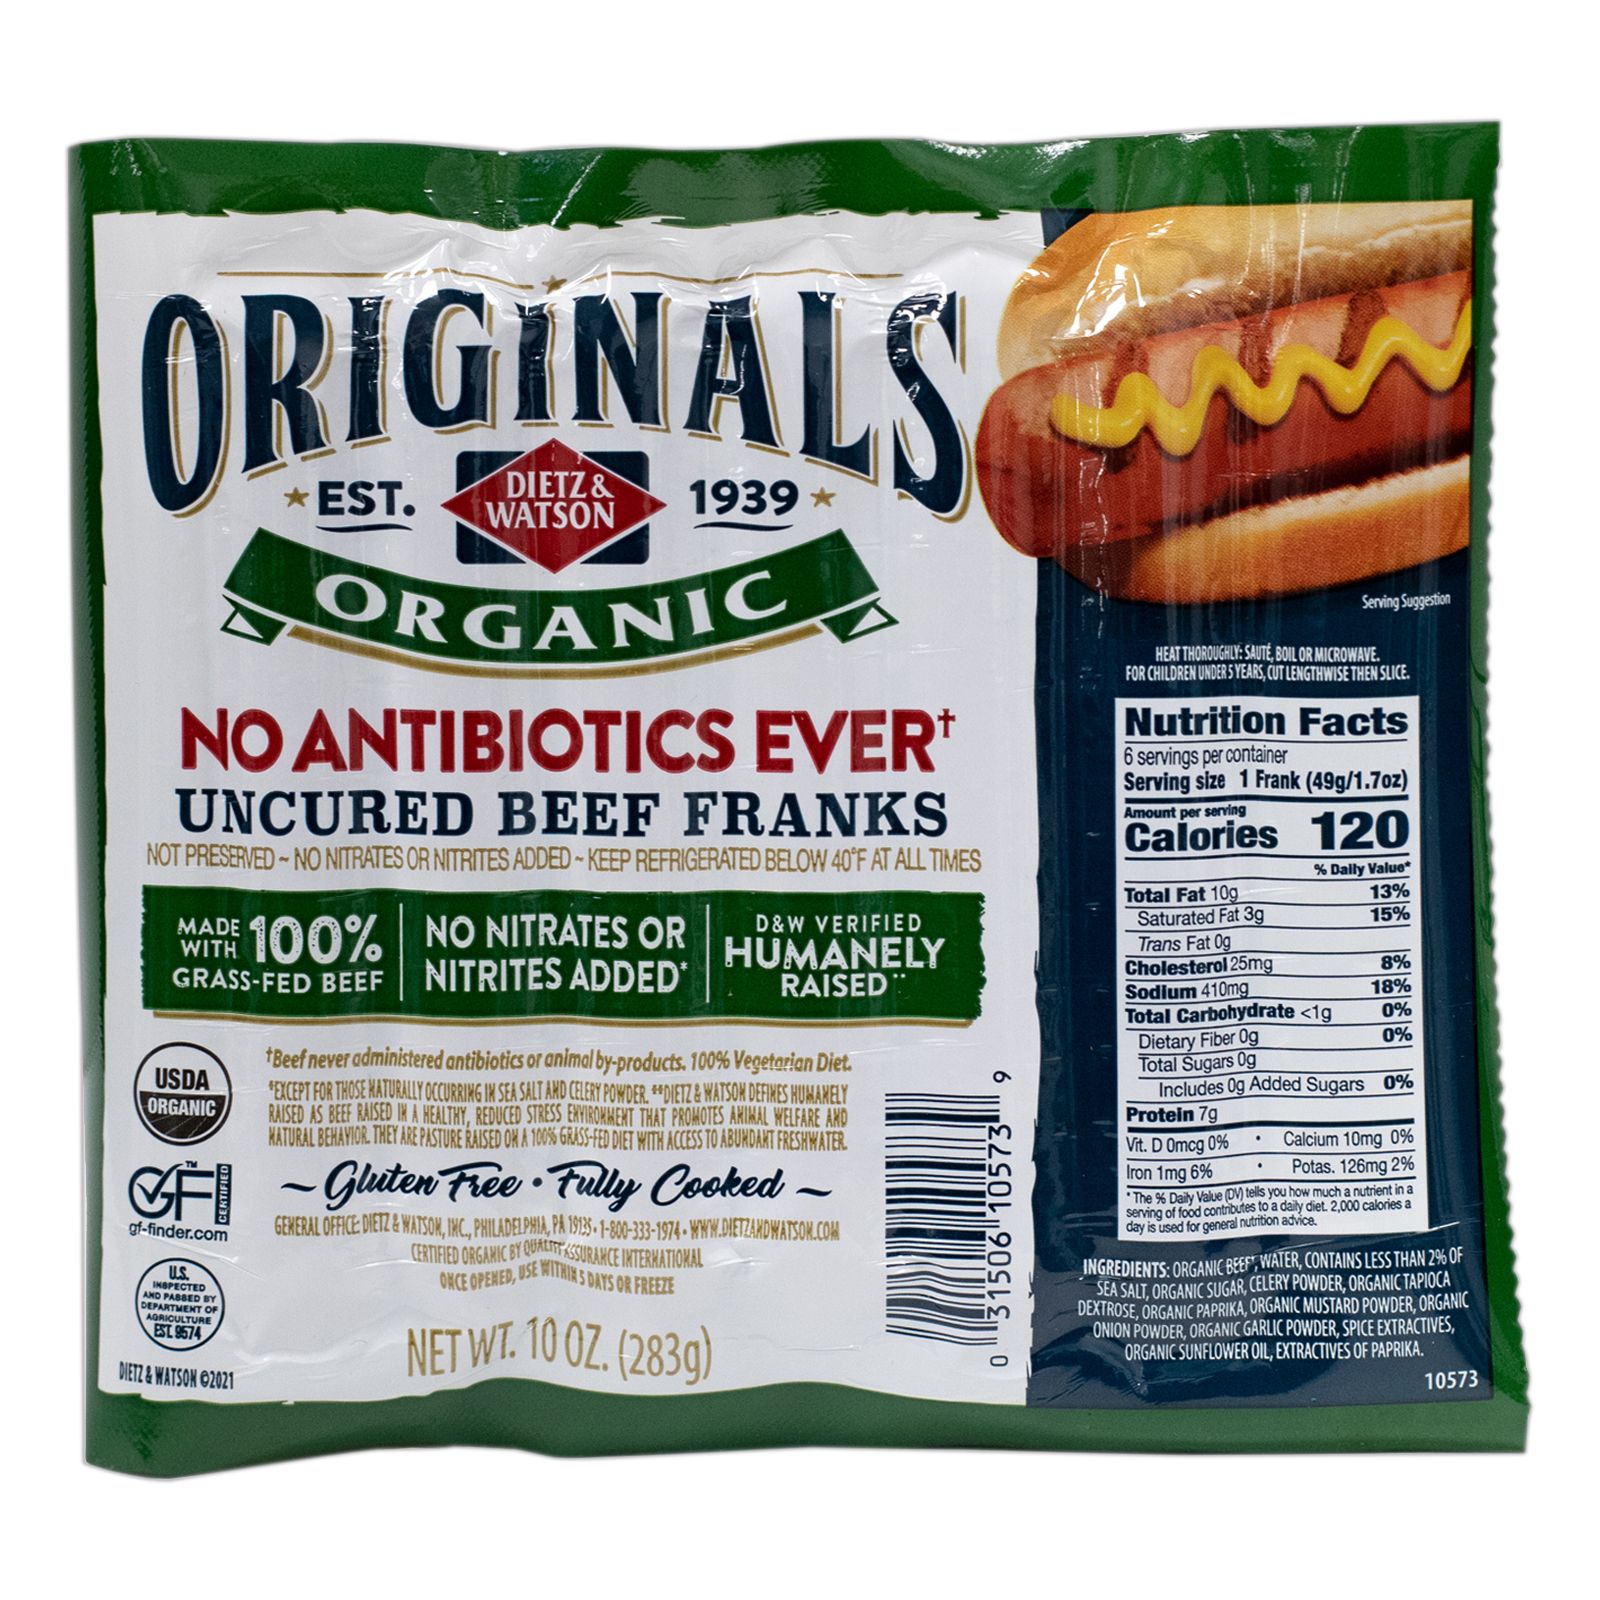 A & H Uncured No Nitrate or Nitrite added Kosher Beef Hot Dog 12 oz.